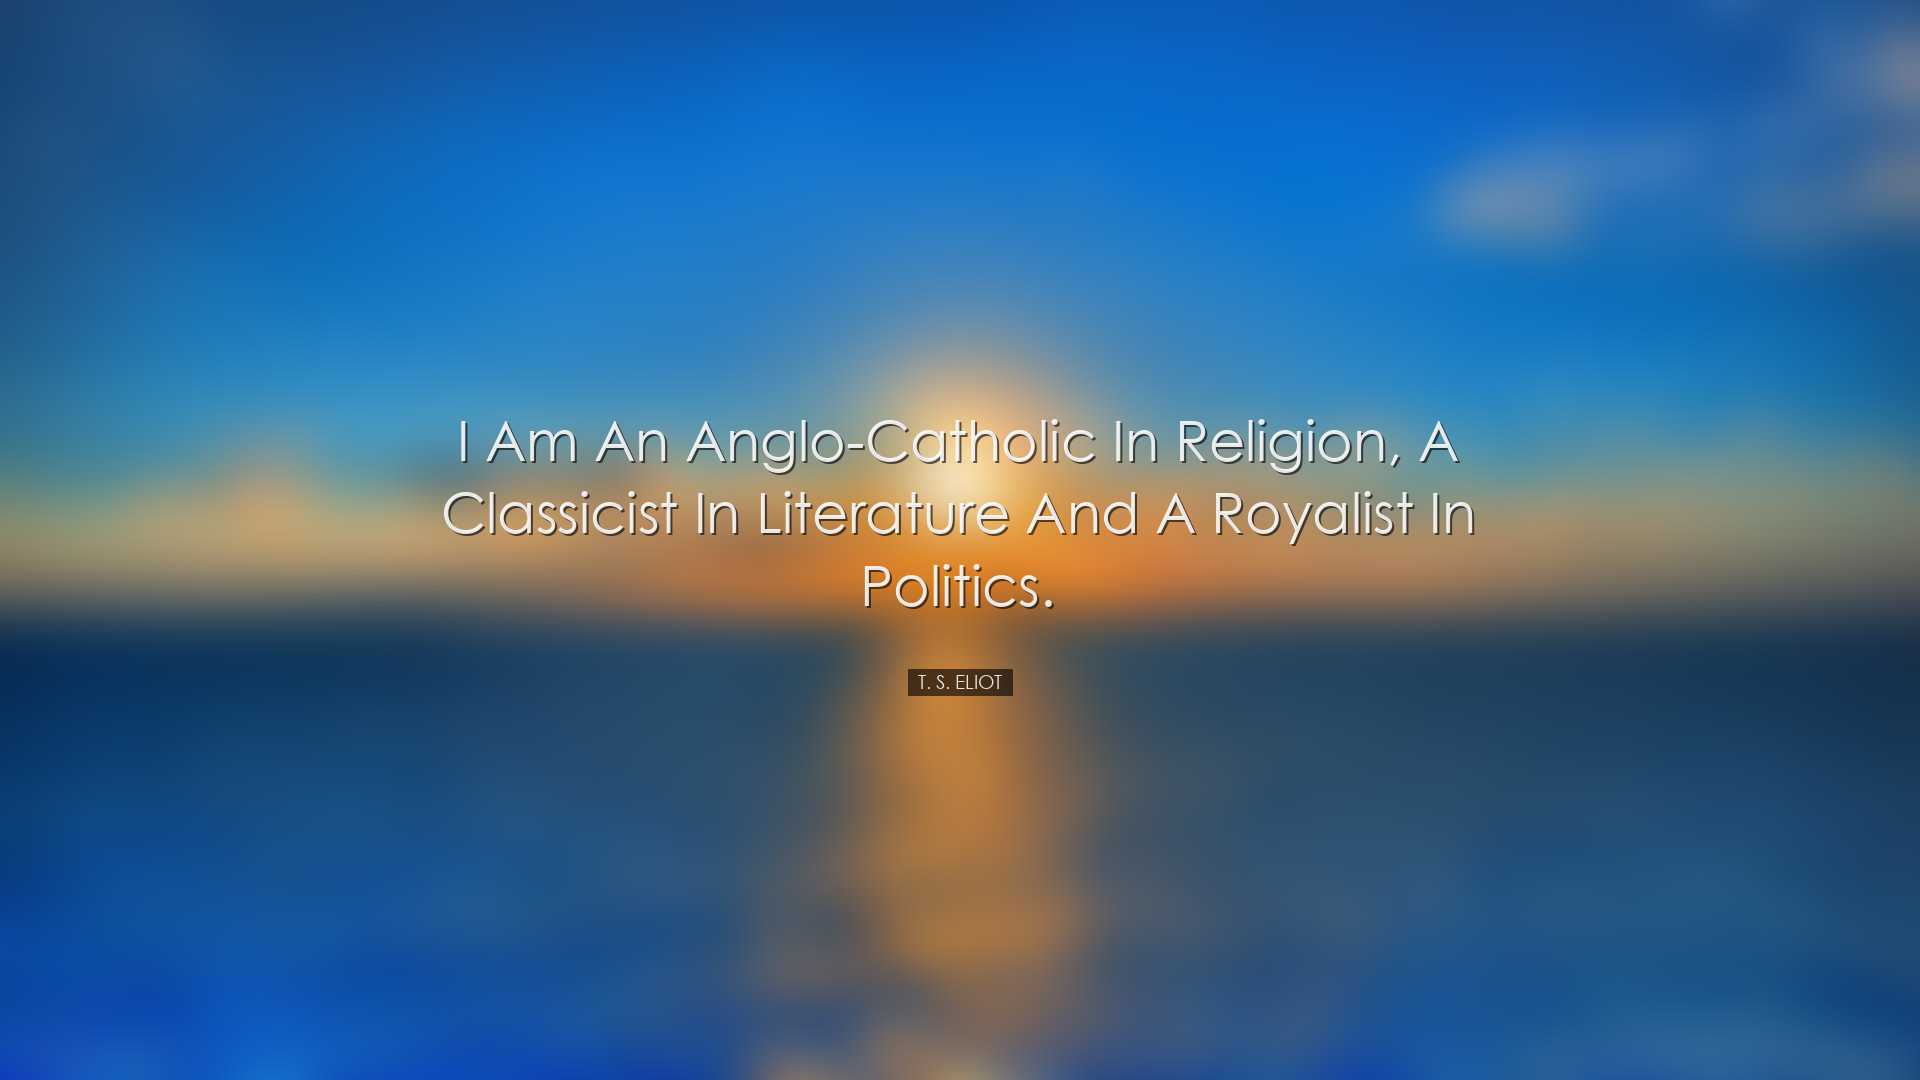 I am an Anglo-Catholic in religion, a classicist in literature and